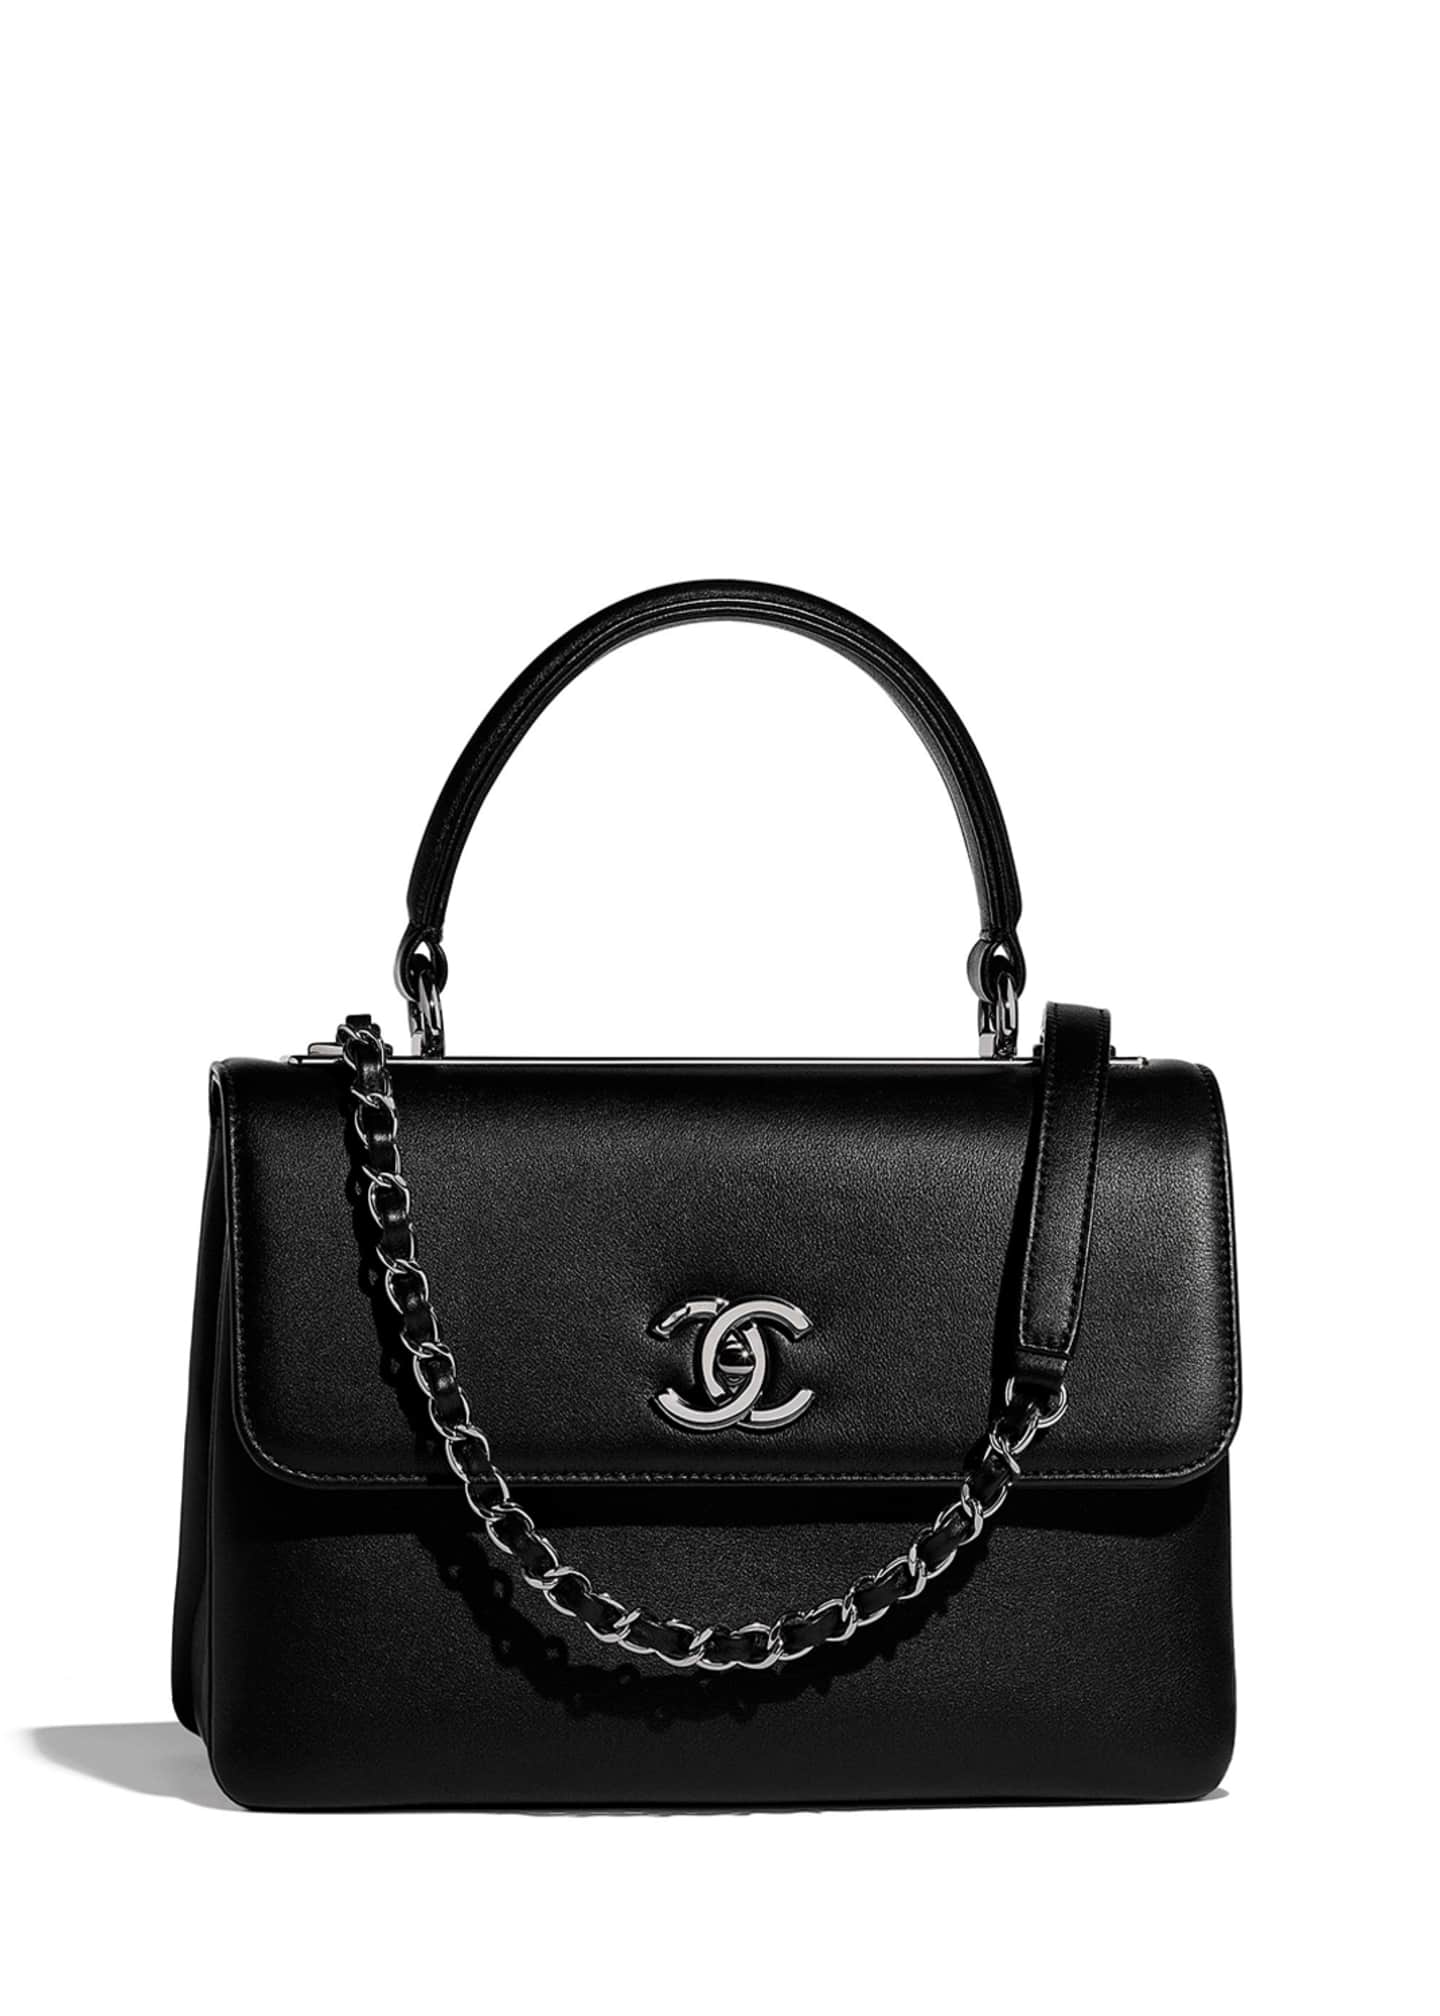 CHANEL Small Flap Bag with Top Handle - Bergdorf Goodman